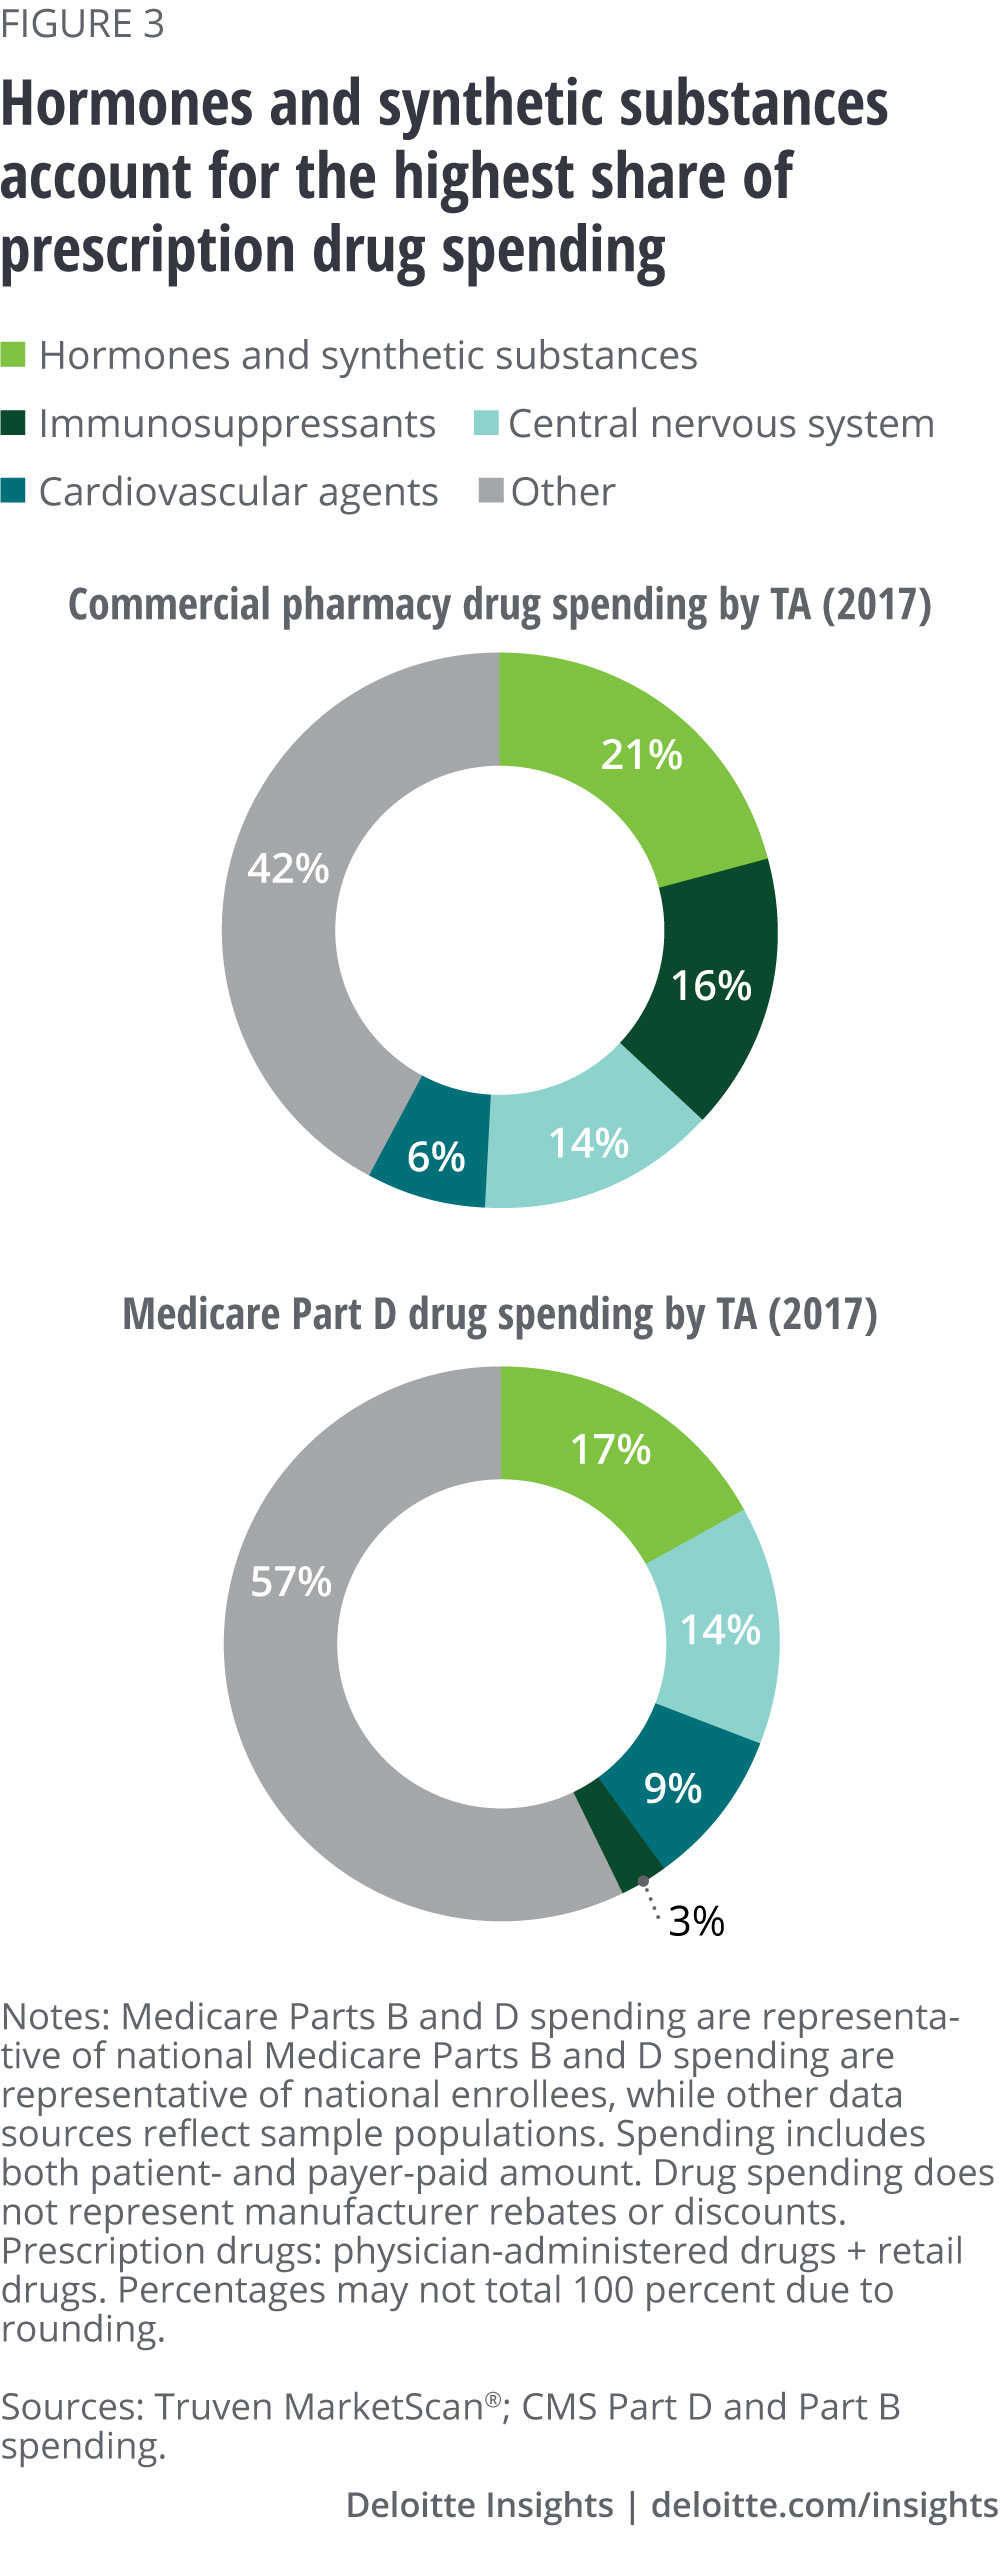 Hormones and synthetic substances account for the highest share of prescription drug spending